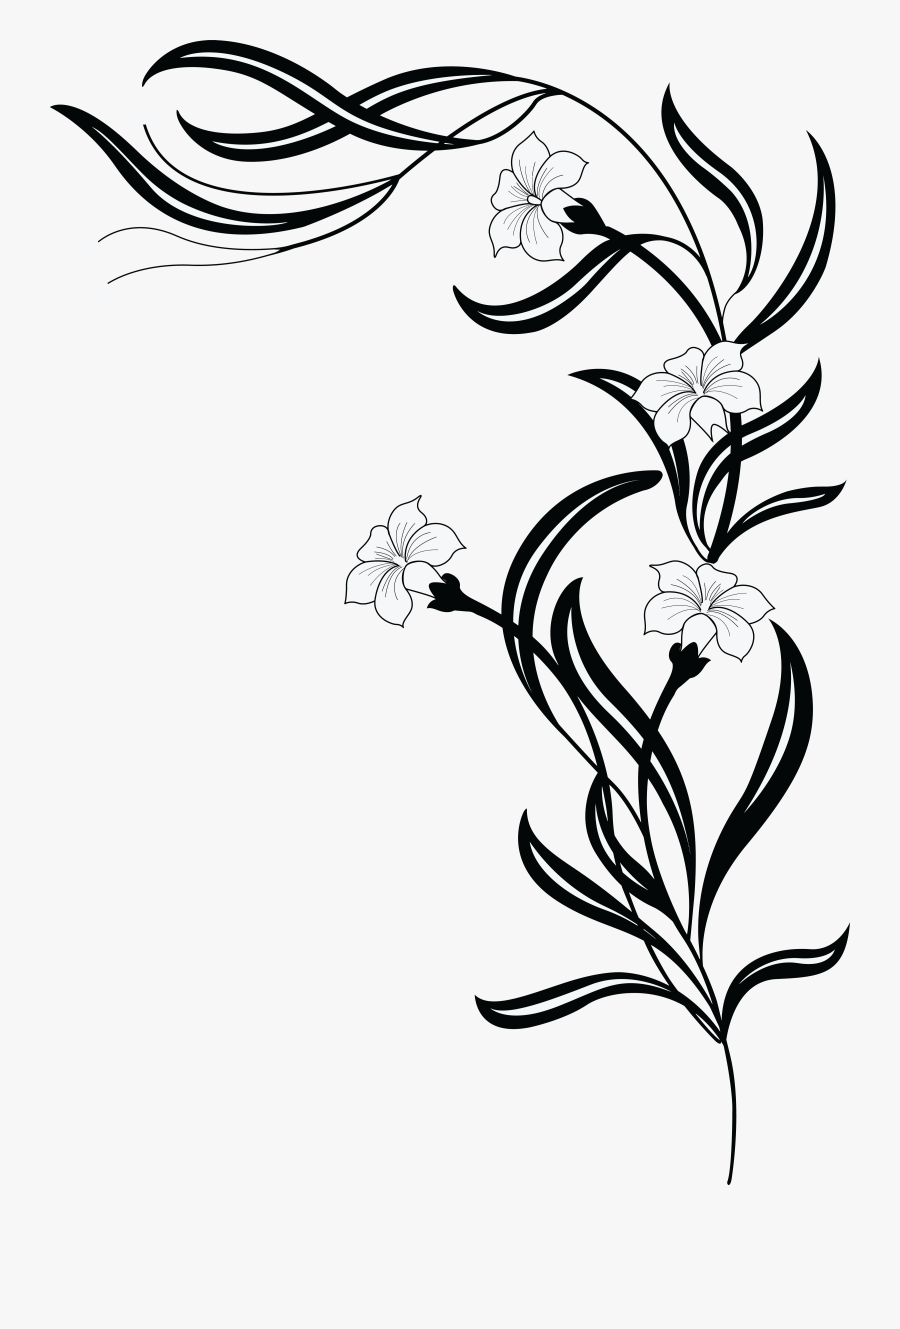 Floral Design With Flowers Leaves And Buds On Vines - Flower Png Black And White, Transparent Clipart